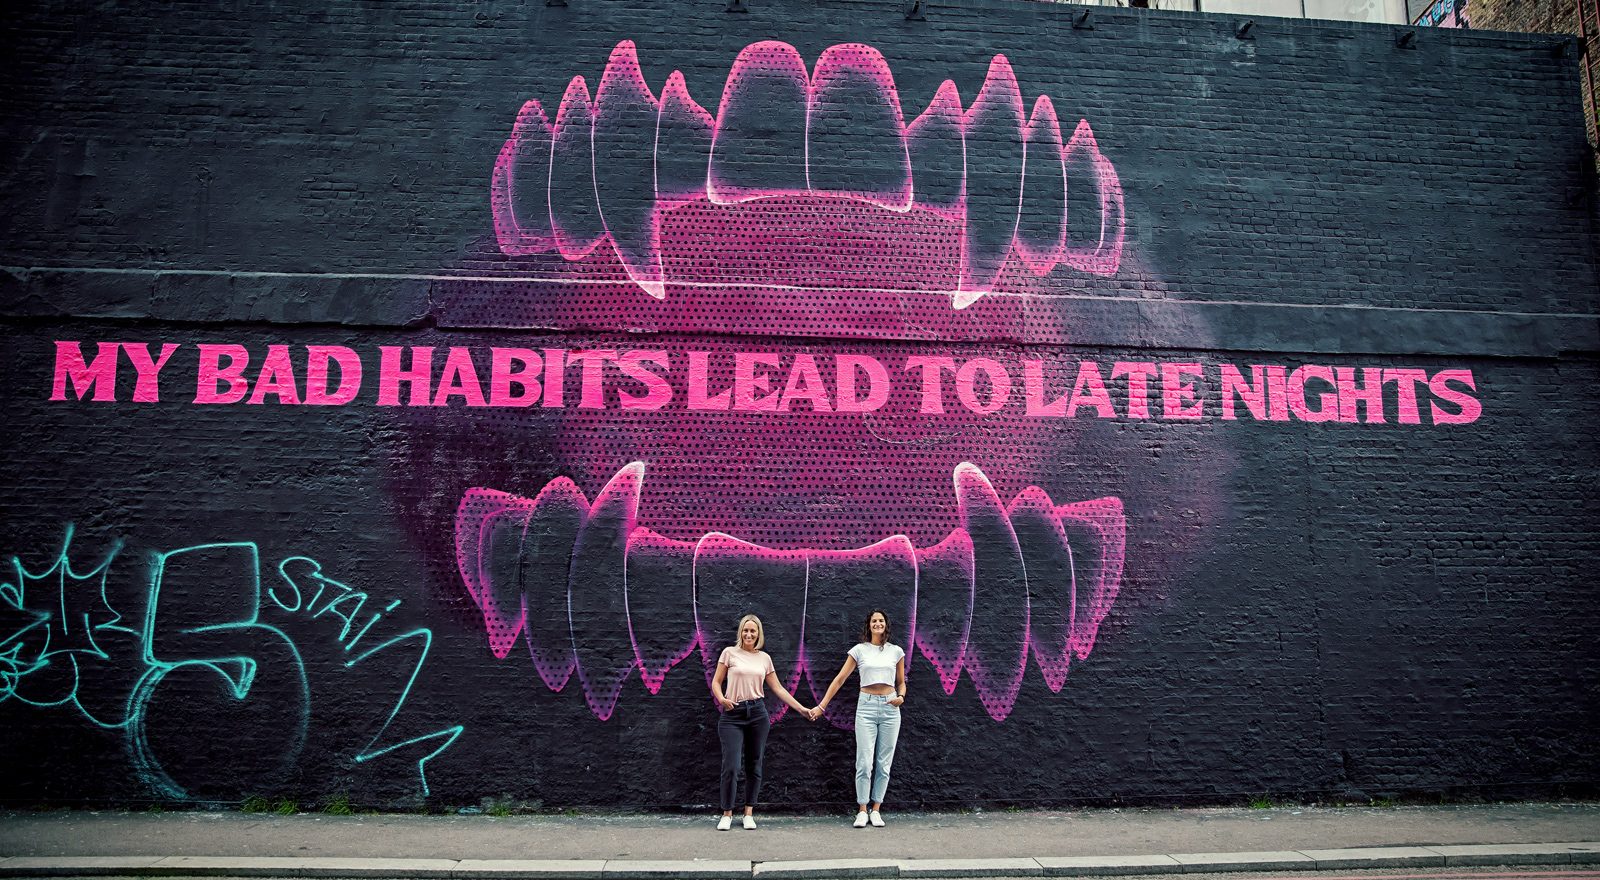 Shoreditch engagement couple in front of large graffiti on black wall London